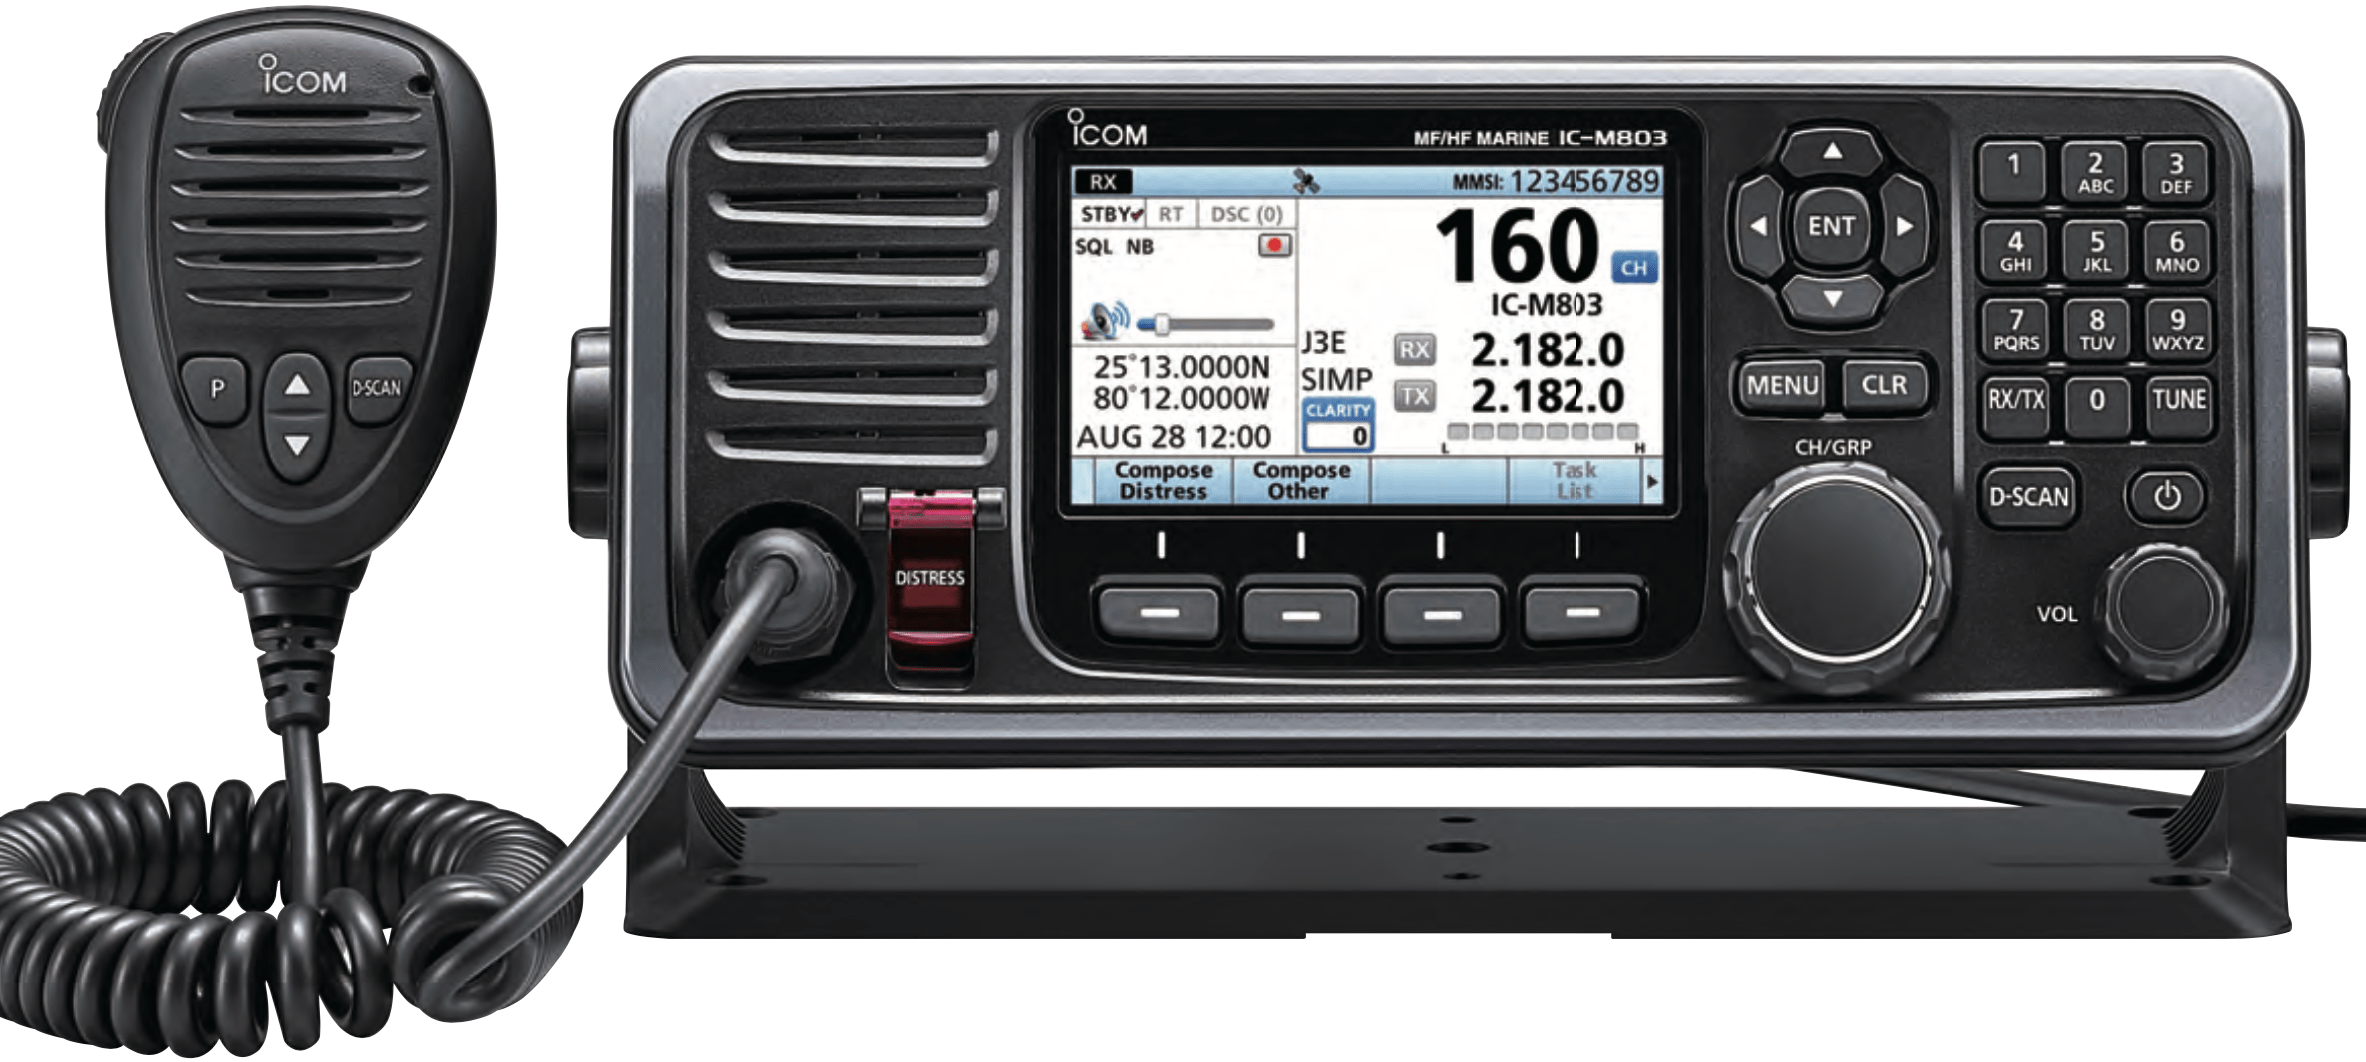 Marine SSB Radio, KISS, GAM, and Pactor Products Sea-Tech Systems